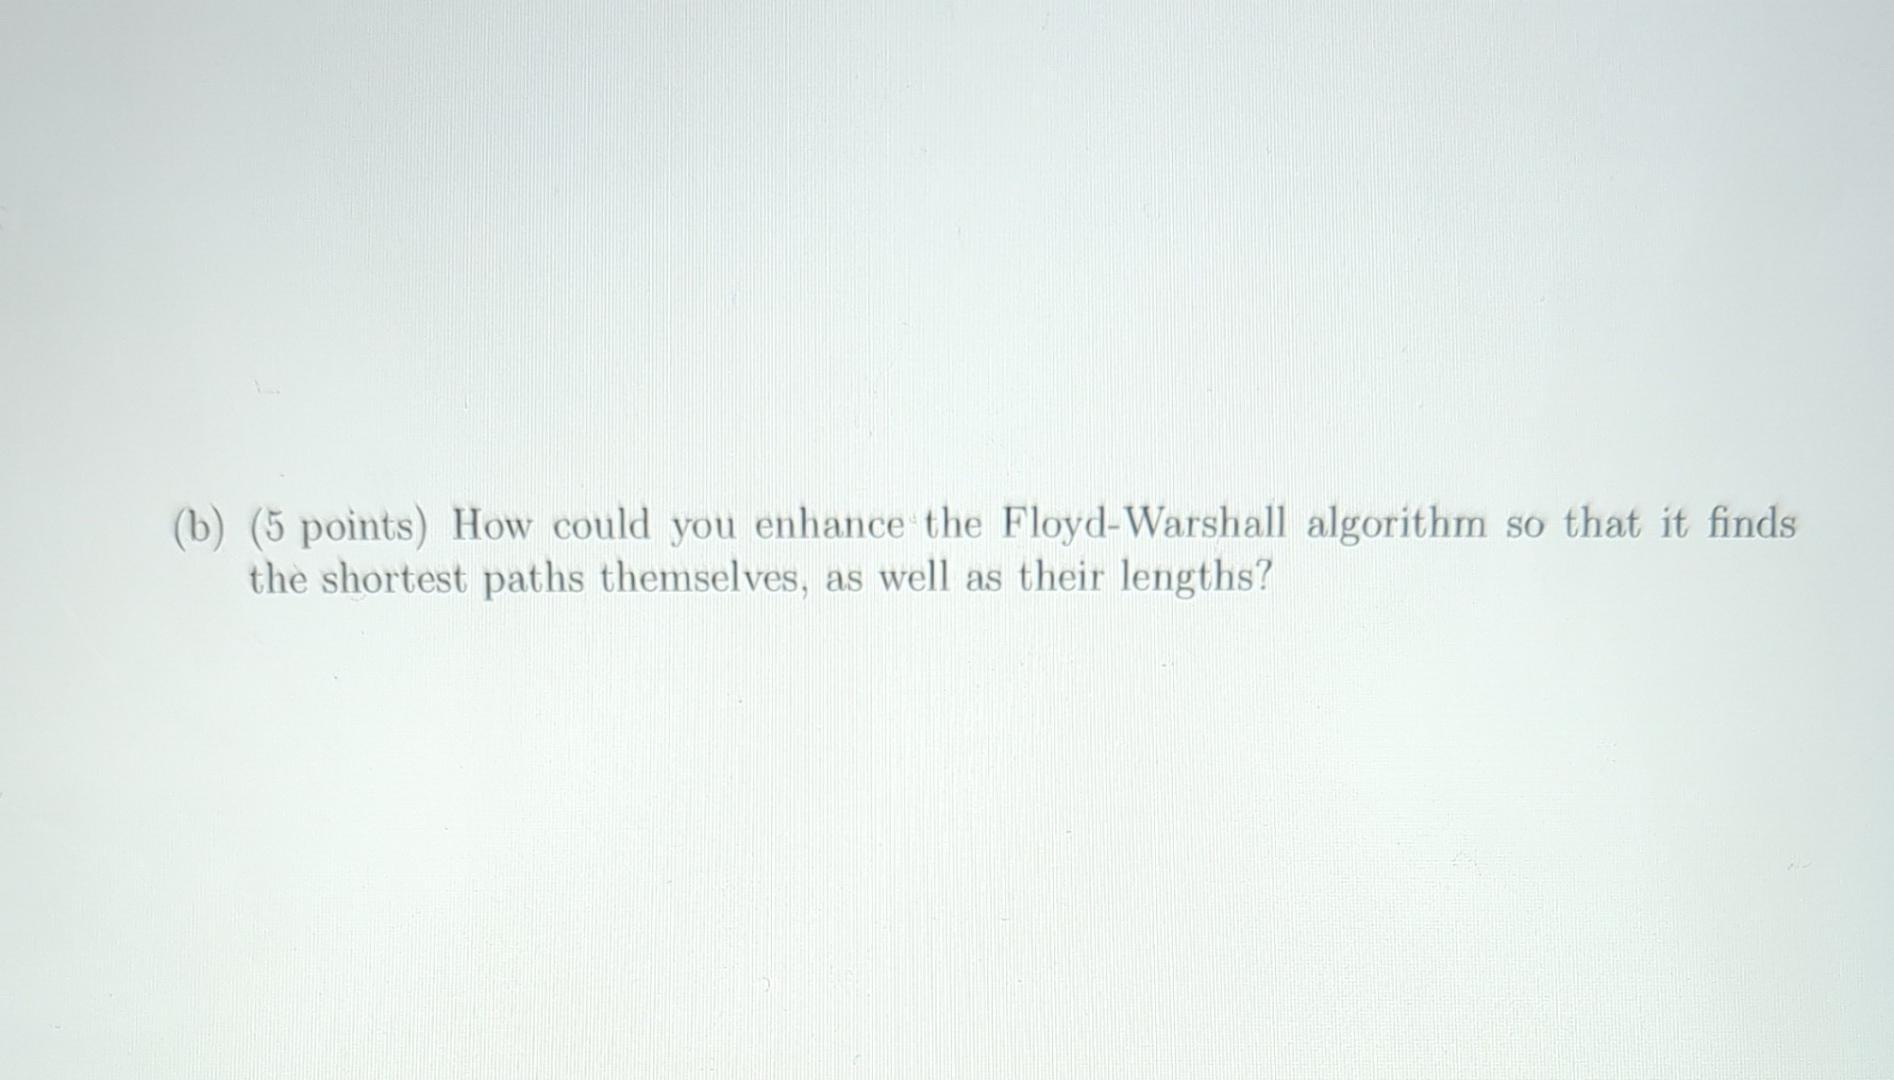 (b) (5 points) How could you enhance the Floyd-Warshall algorithm so that it finds the shortest paths themselves, as well as 